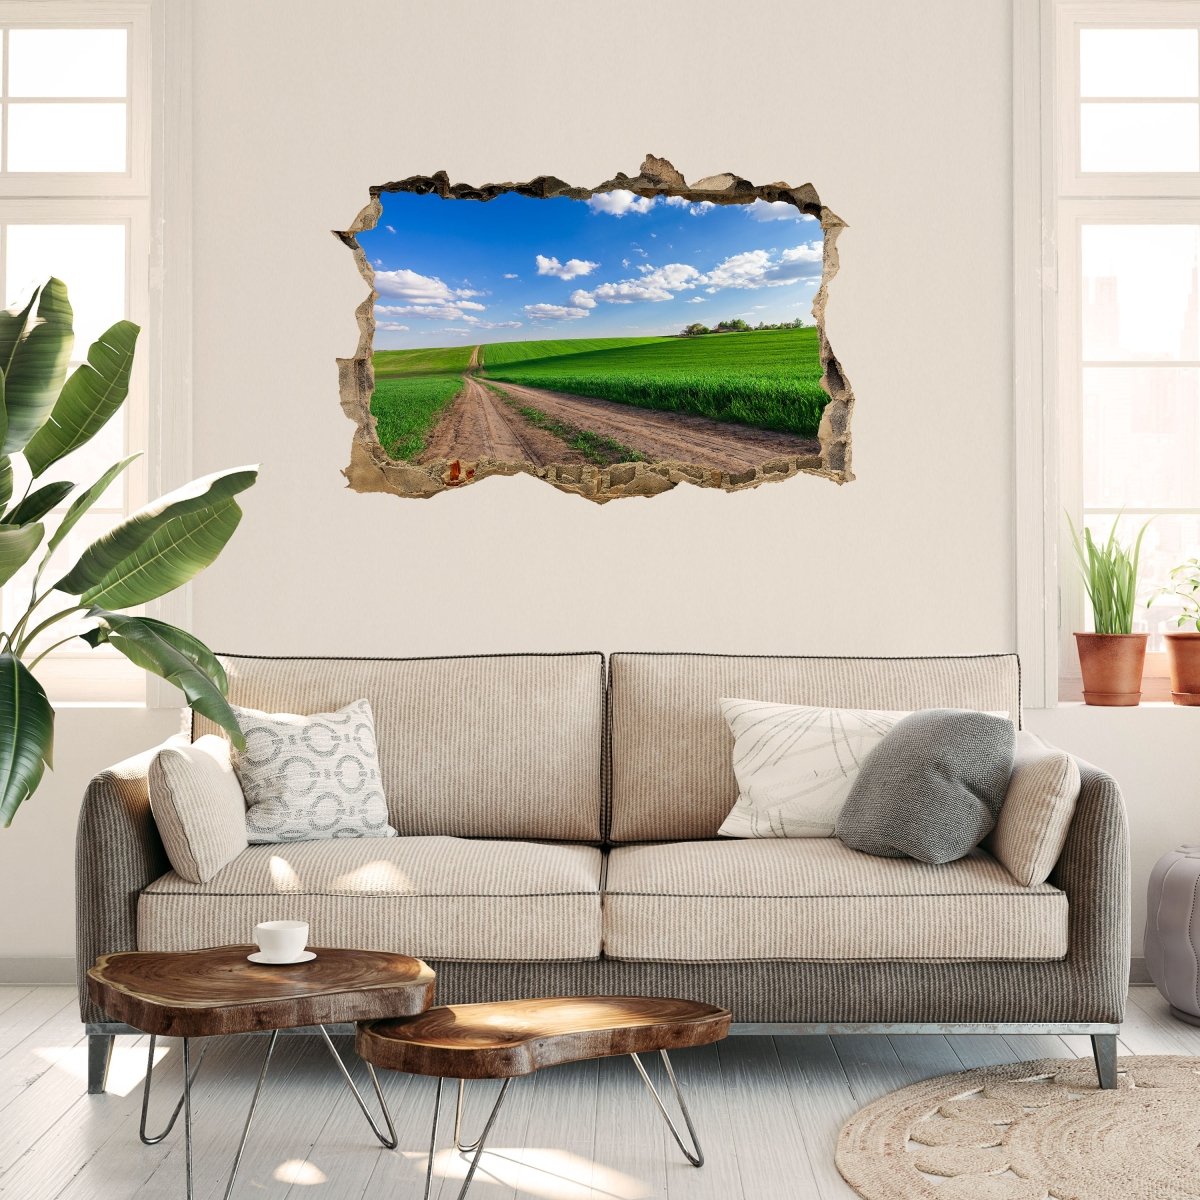 3D wall sticker dirt road in the sun, clouds, field - Wall Decal M1229